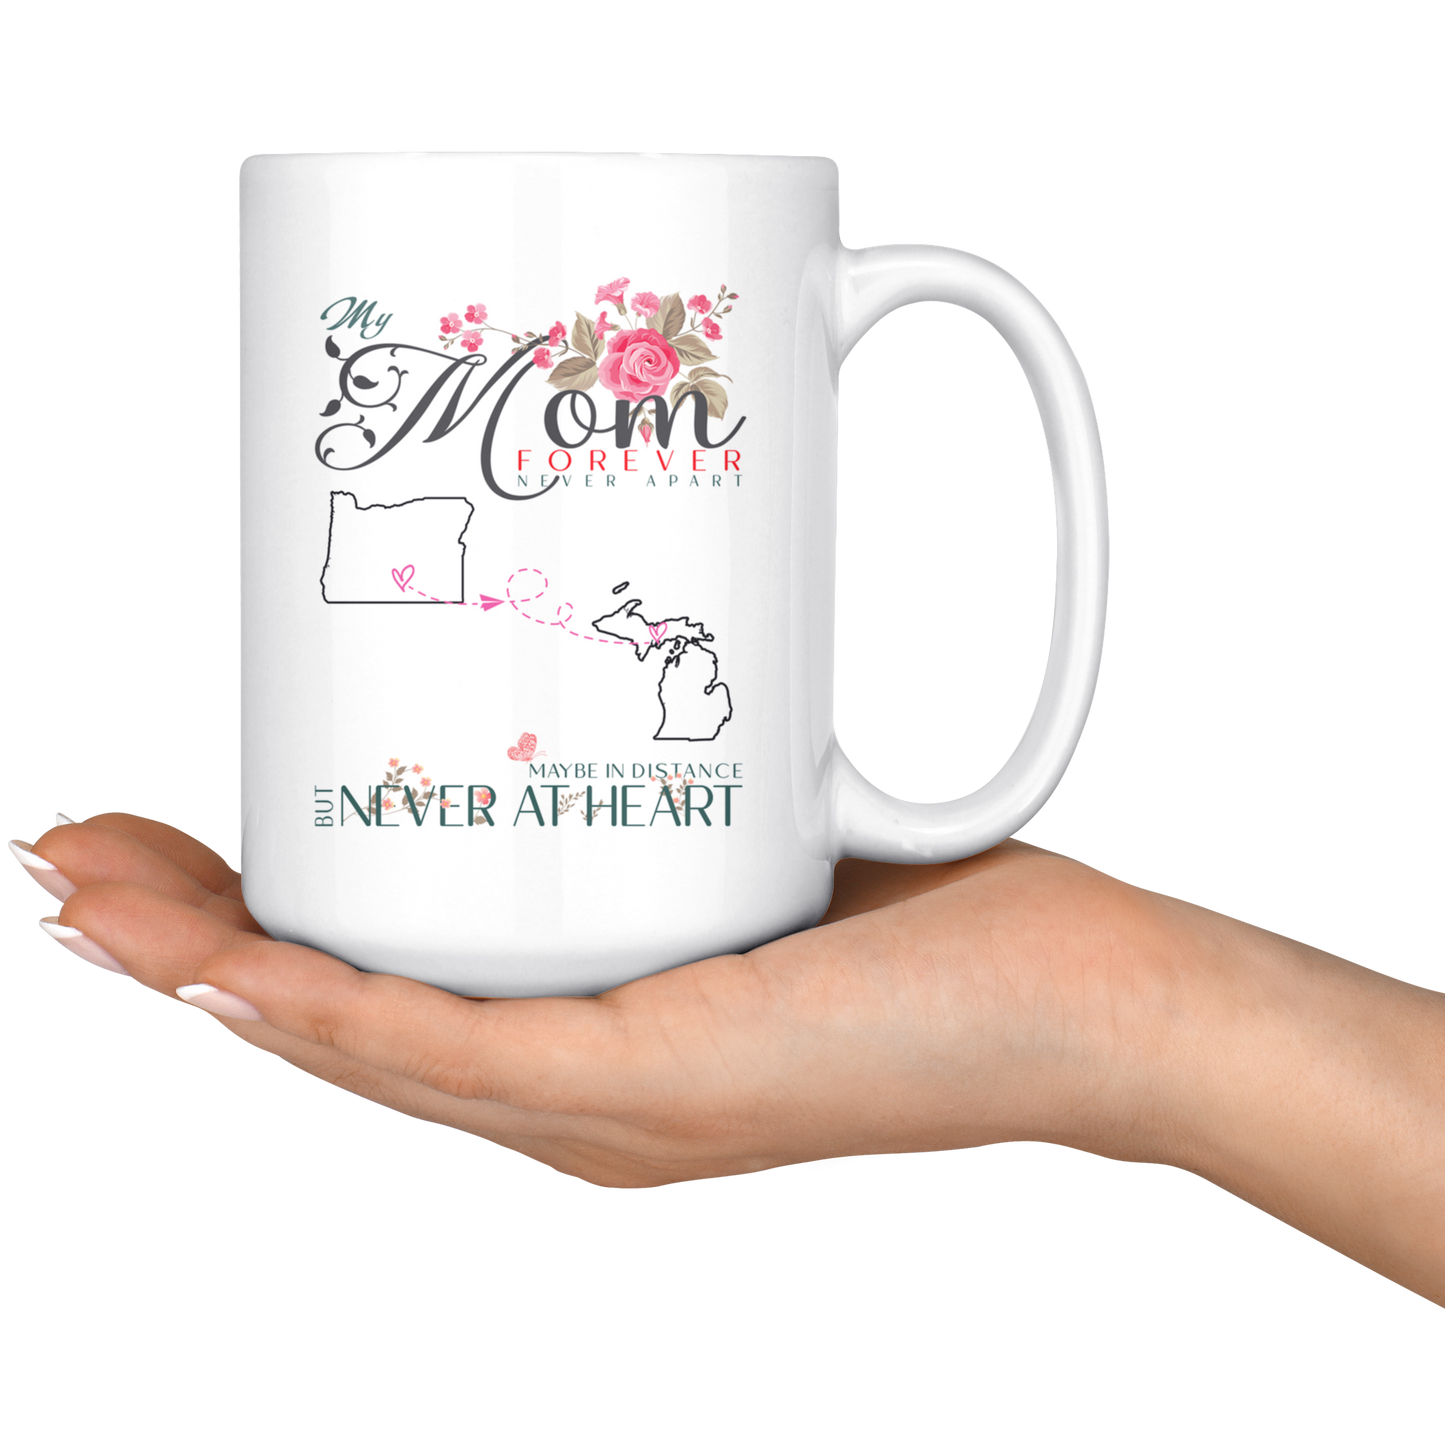 M-20321571-sp-23766 - [ Oregon | Michigan ]Personalized Mothers Day Coffee Mug - My Mom Forever Never A